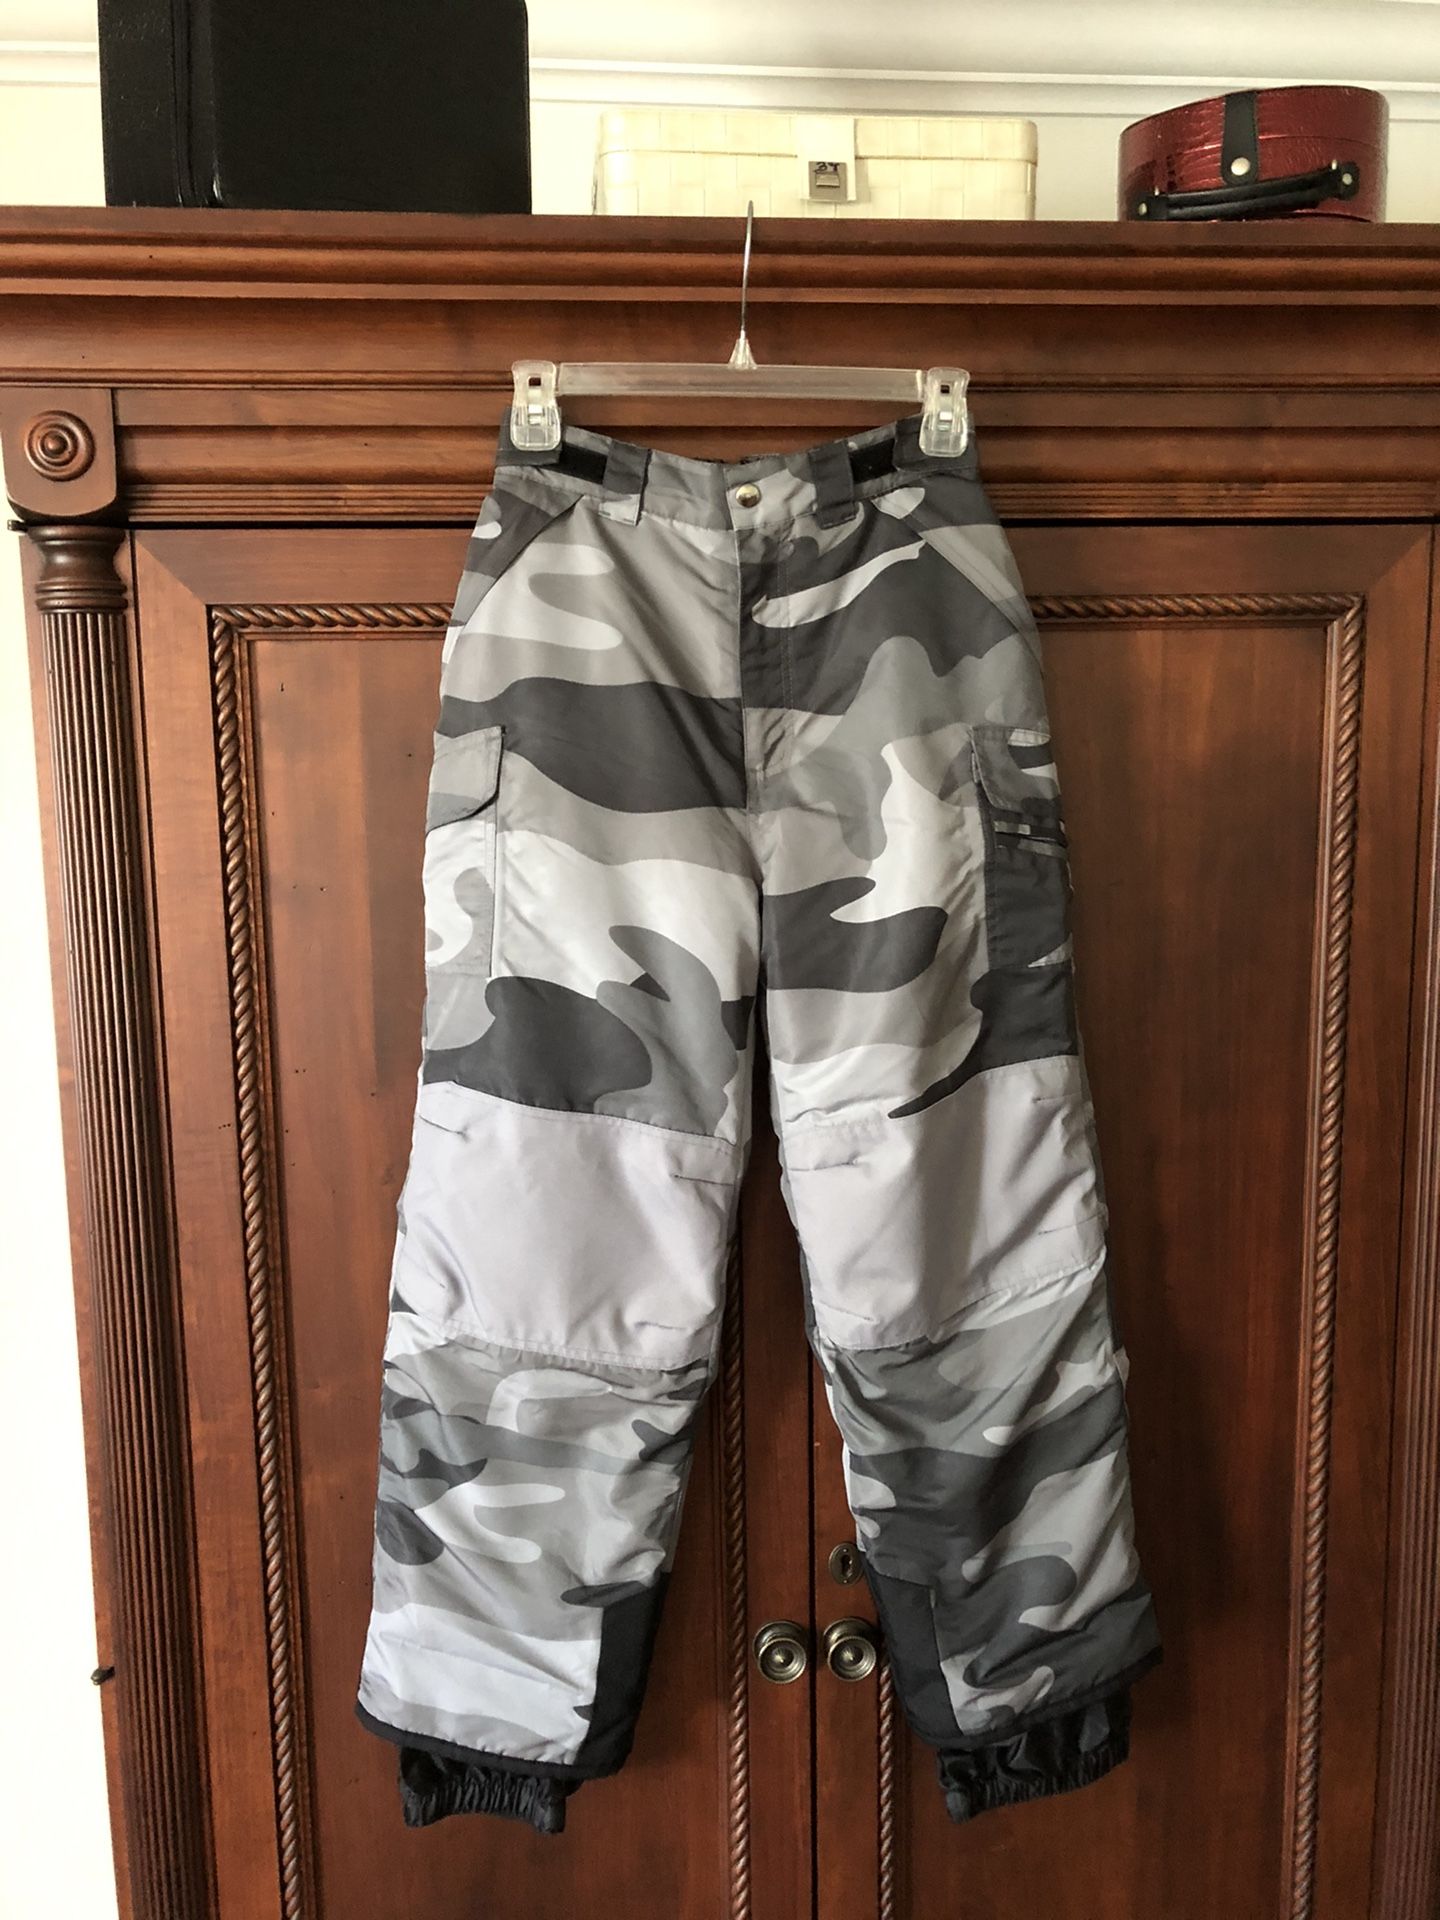 Youth size large warm winter ski/snowboard pants excellent condition in Weston